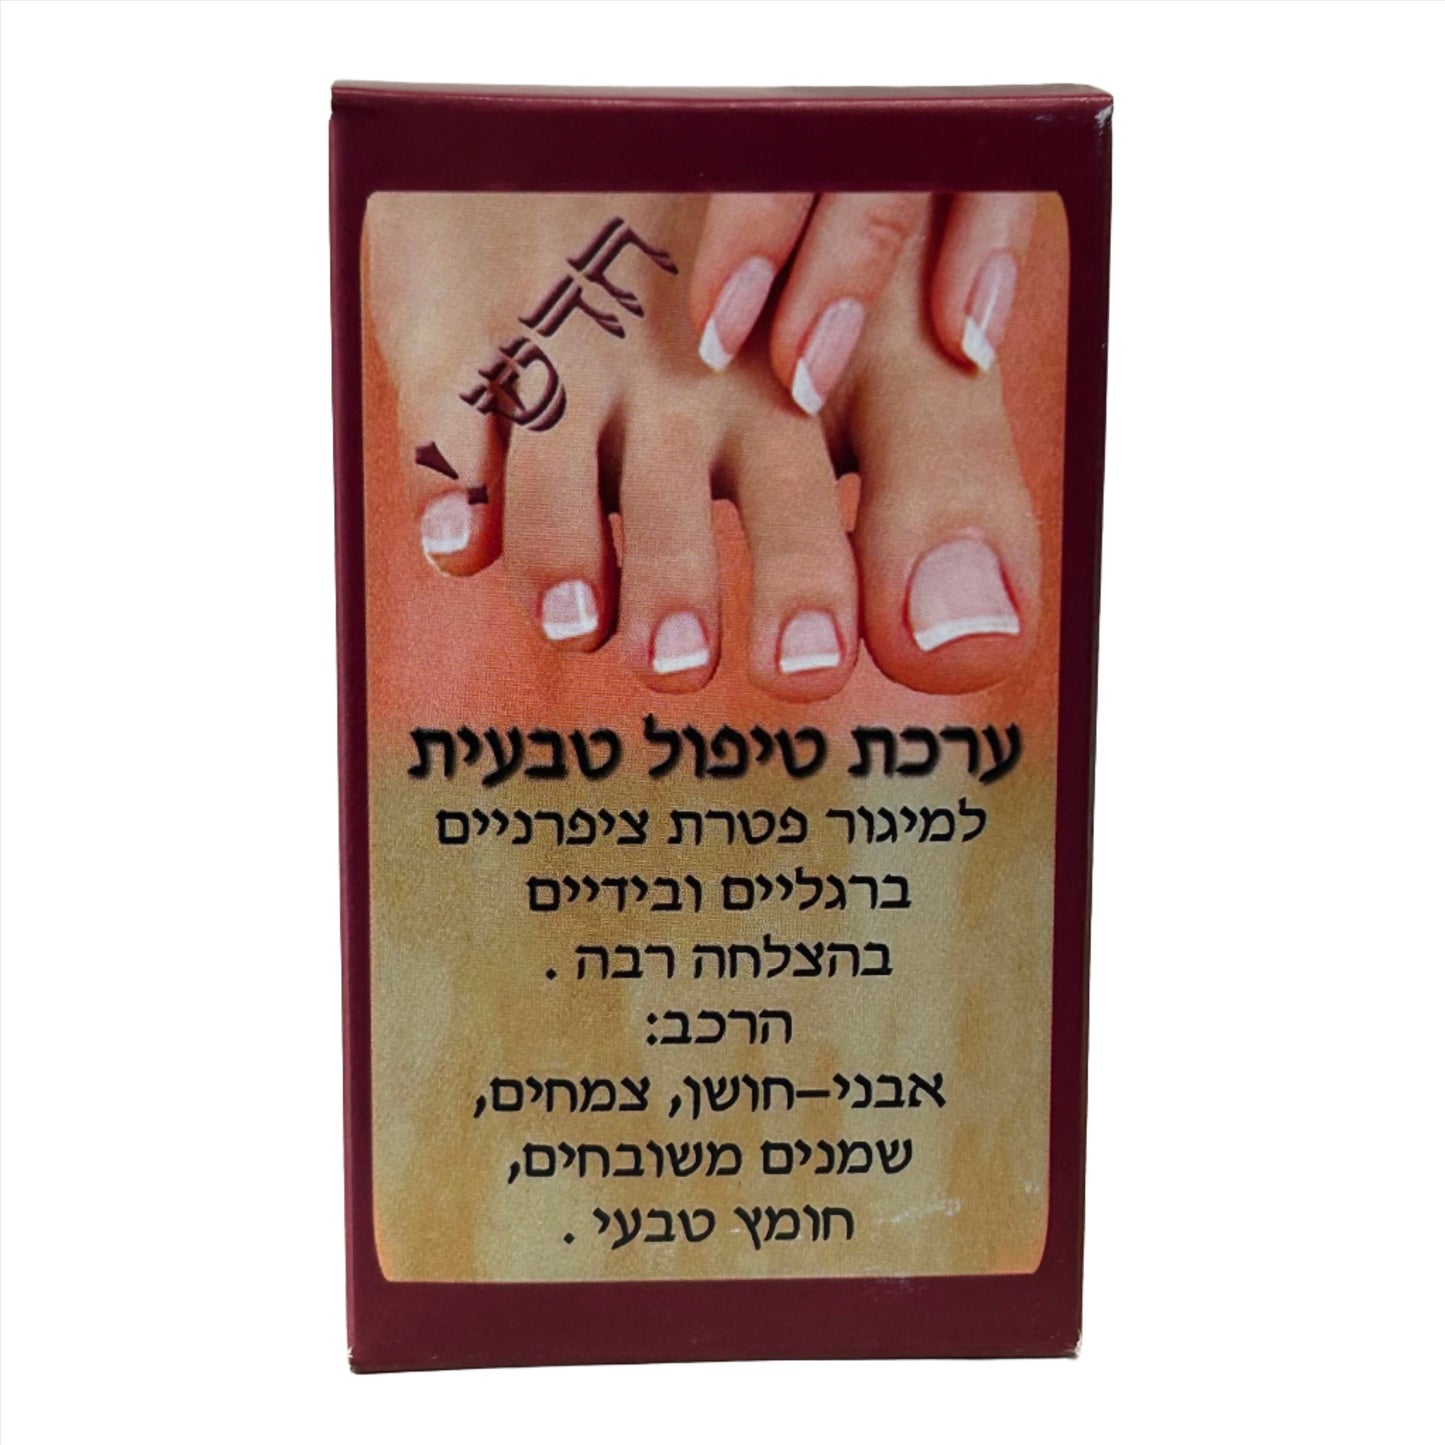 Natural Treatment for Fungal Infection of the Nails Healing Essence by Dr Gila Gavrielov